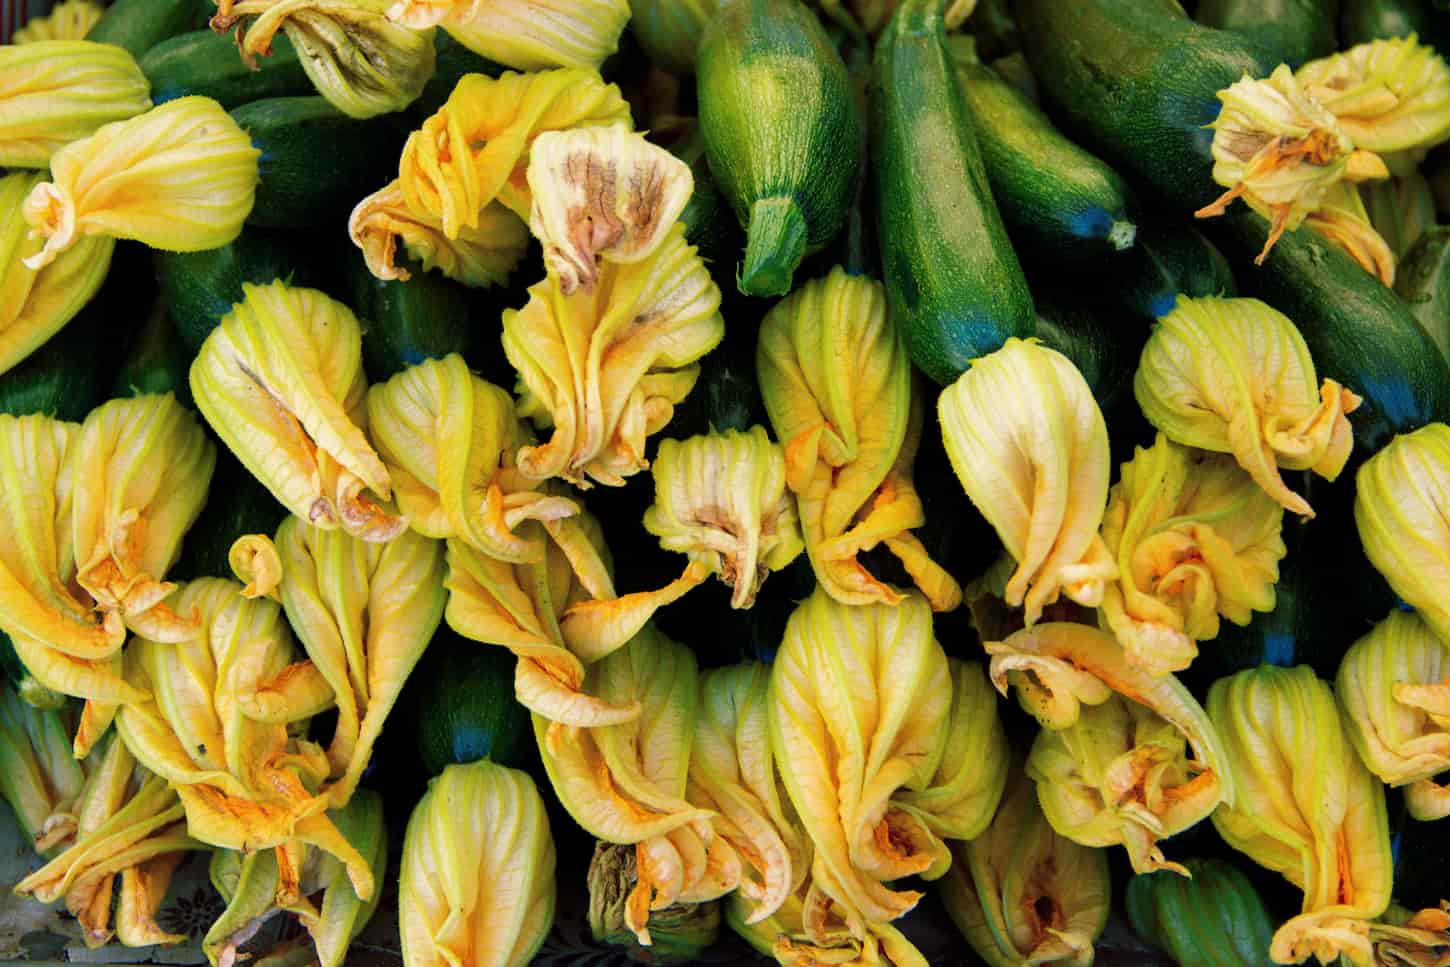 An image of young zucchini with flowers on a farmers' market.